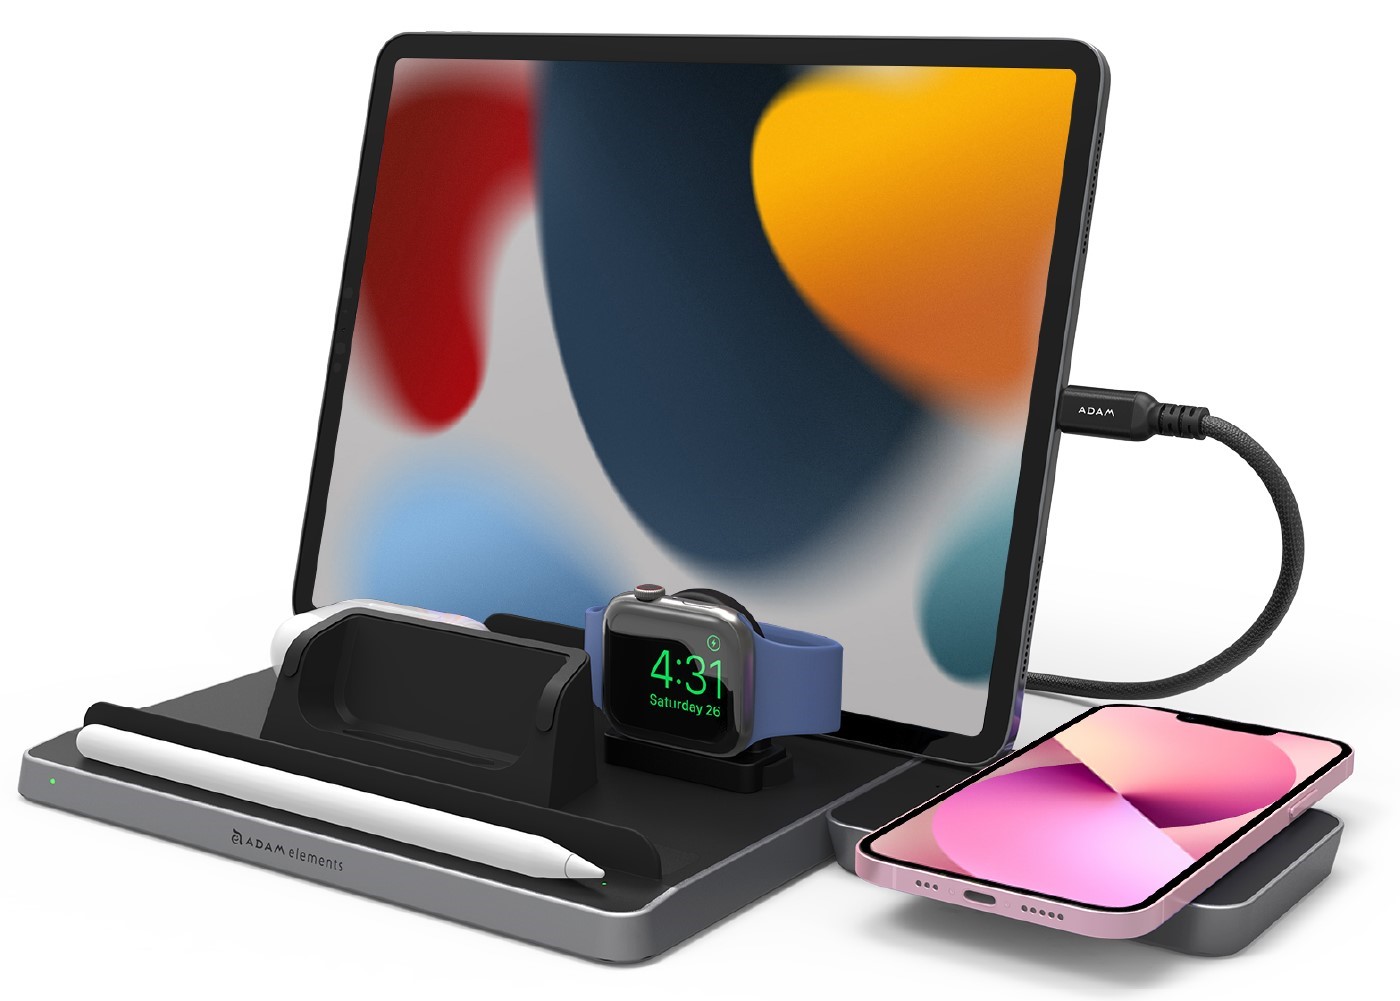 Charging station for Apple Watch, iPhone & AirPods